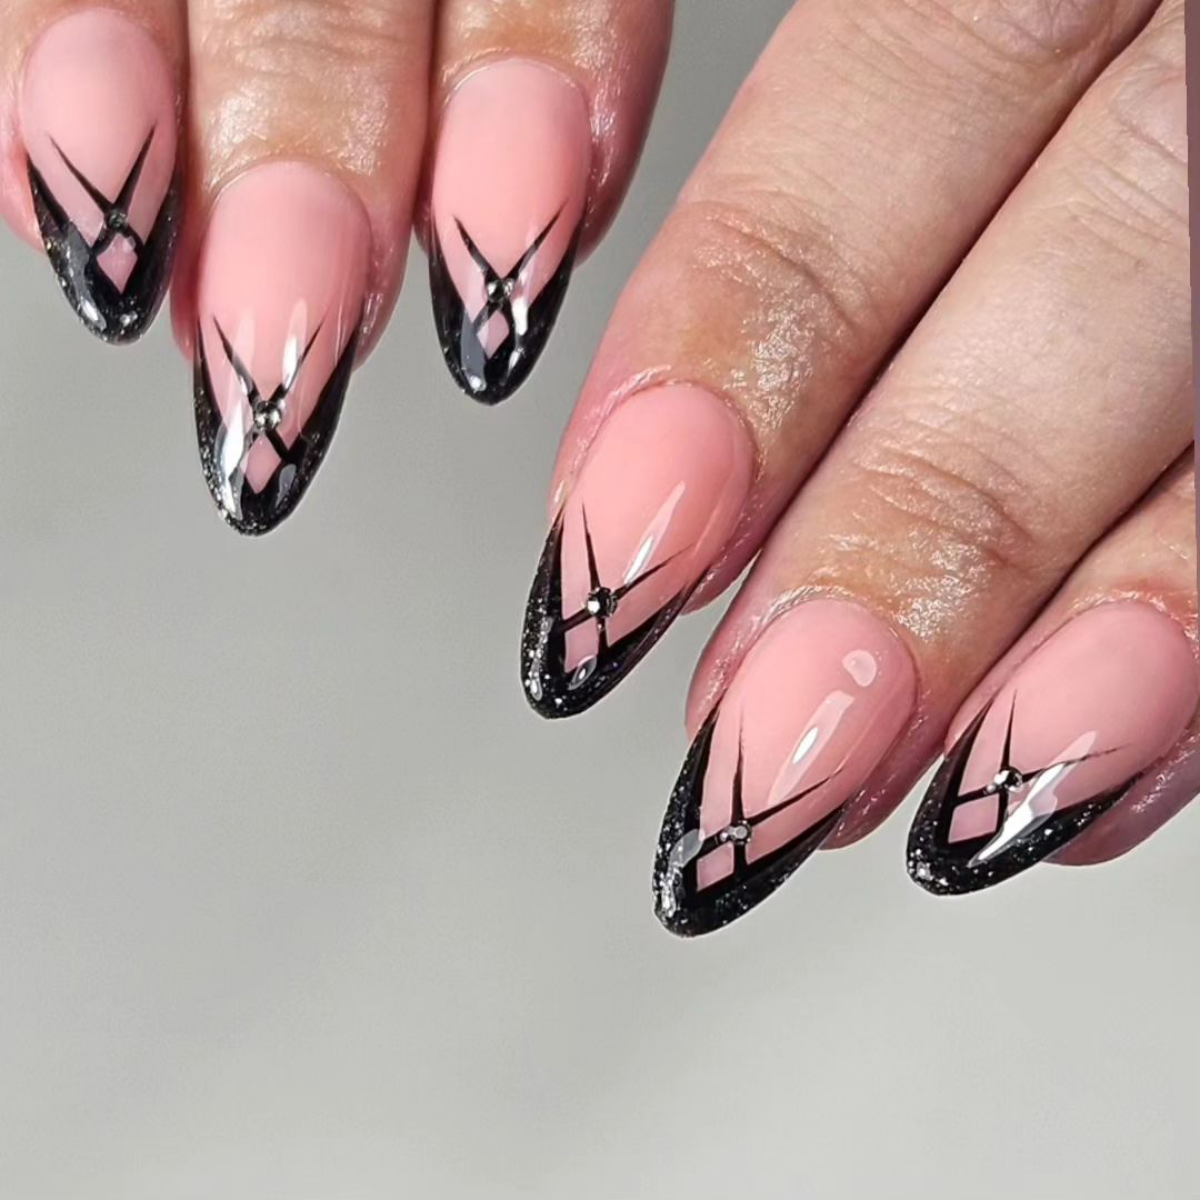 lagriffe noire dark french tips